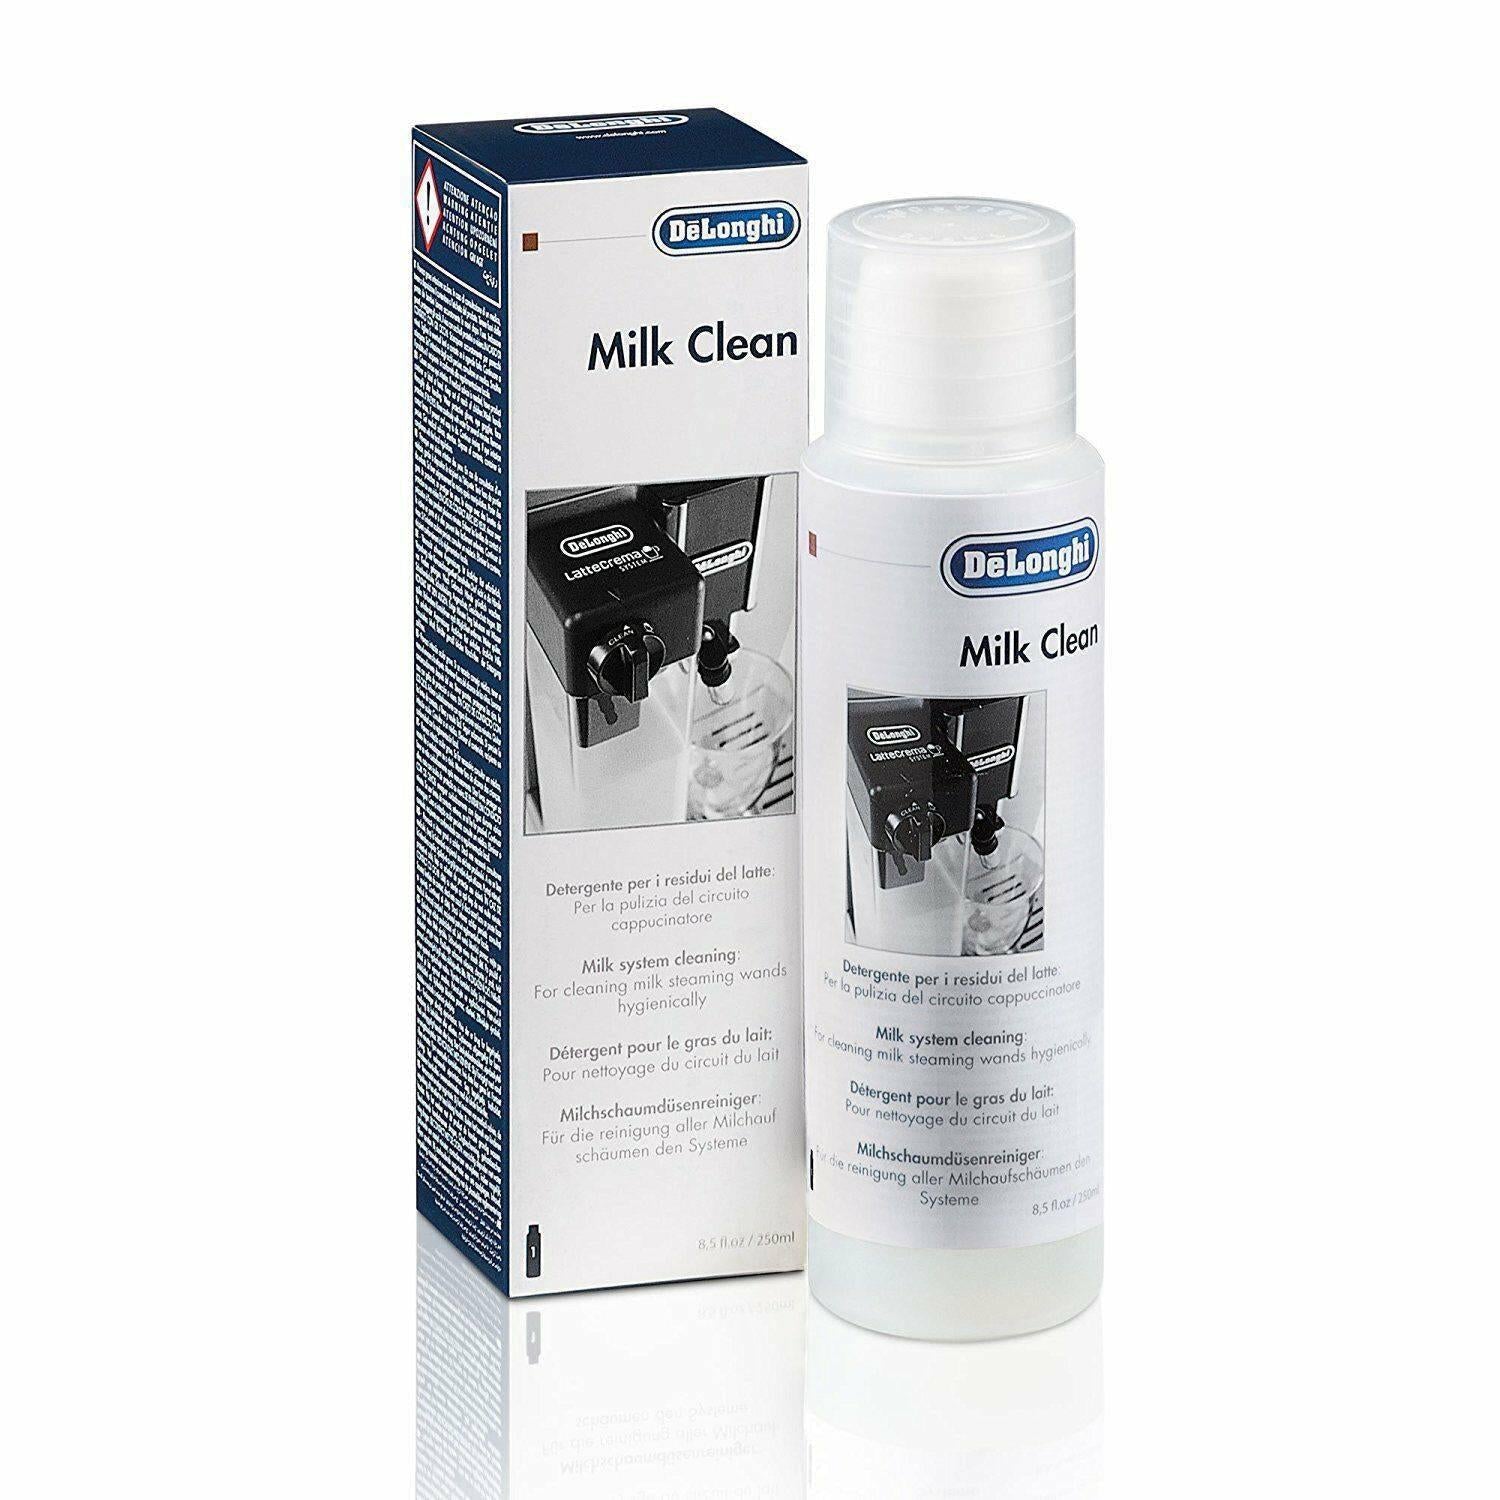 De'Longhi SER3013 Milk Cleaning Solution for Coffee Machines - Pack of 1, 250ml - Healthxpress.ie